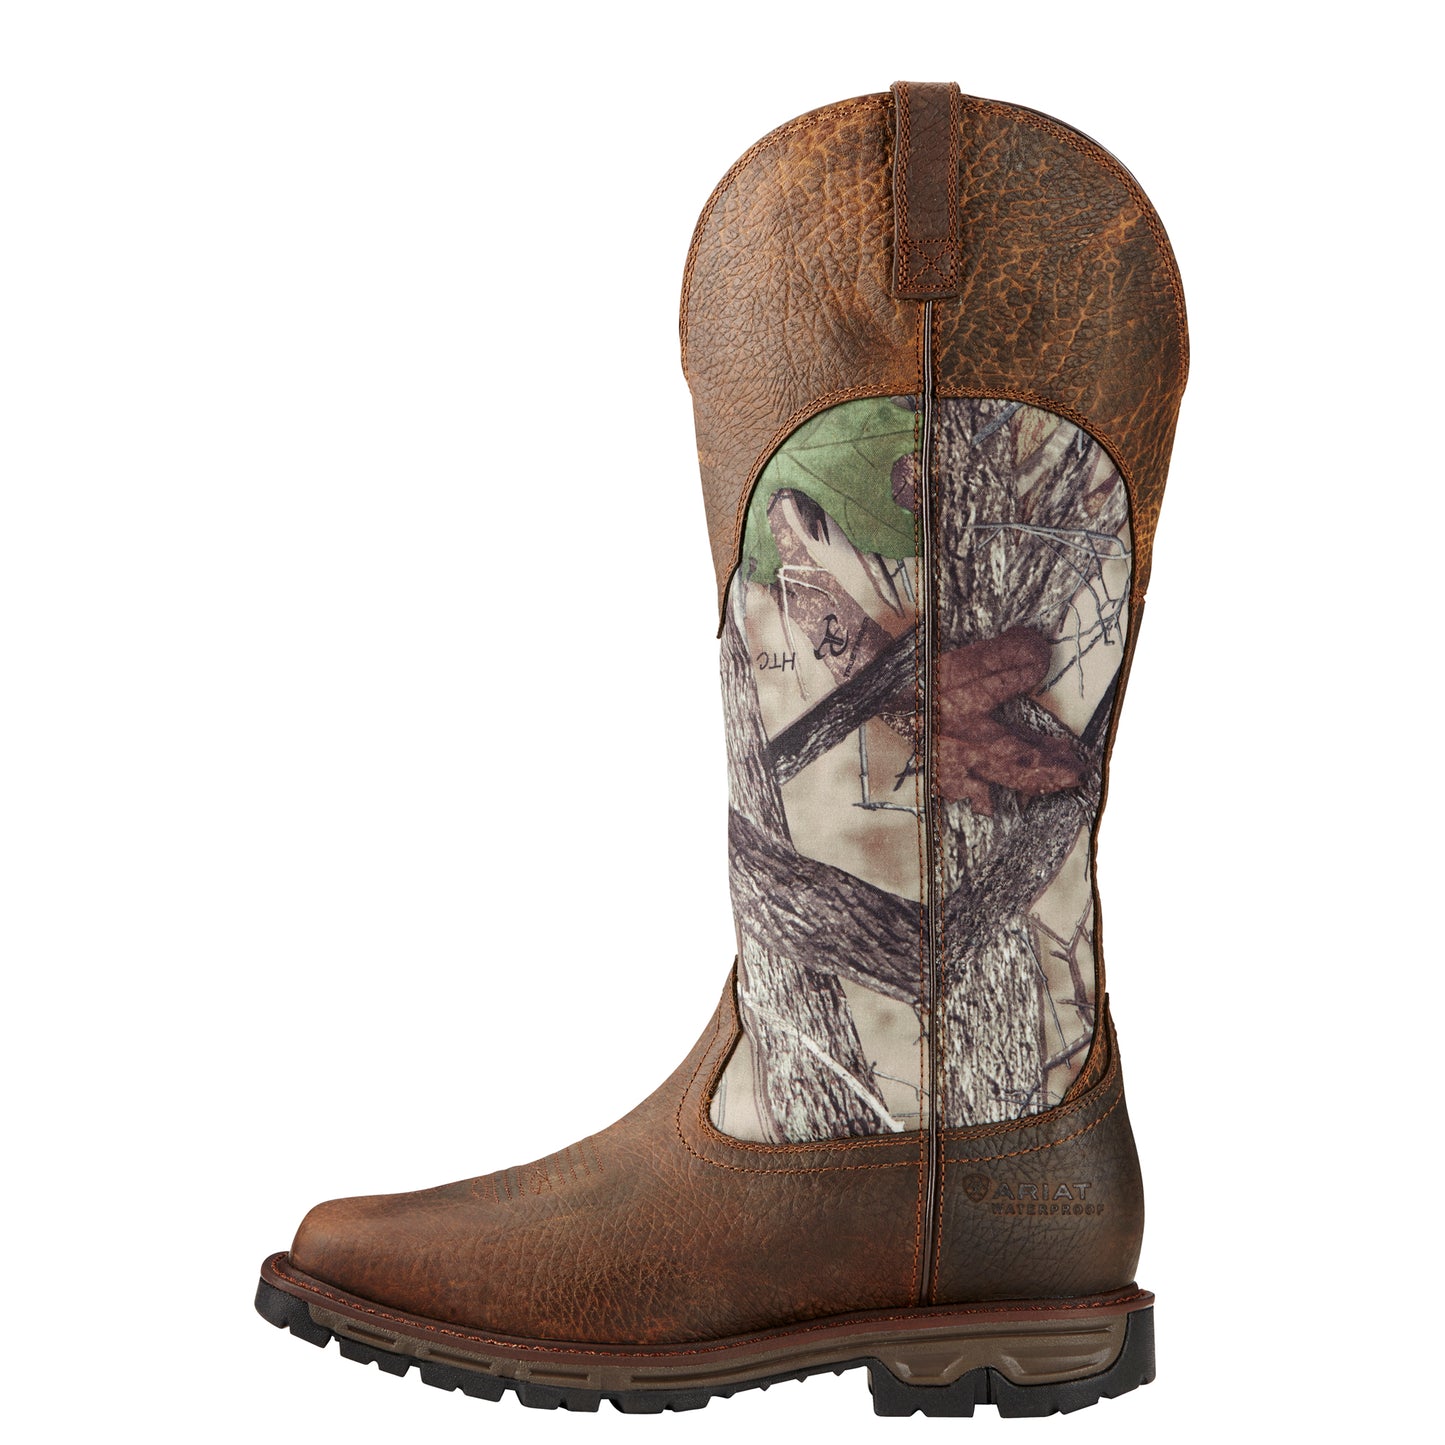 Ariat® Men's Camo Conquest Waterproof Hunting Snake Boot 10018700